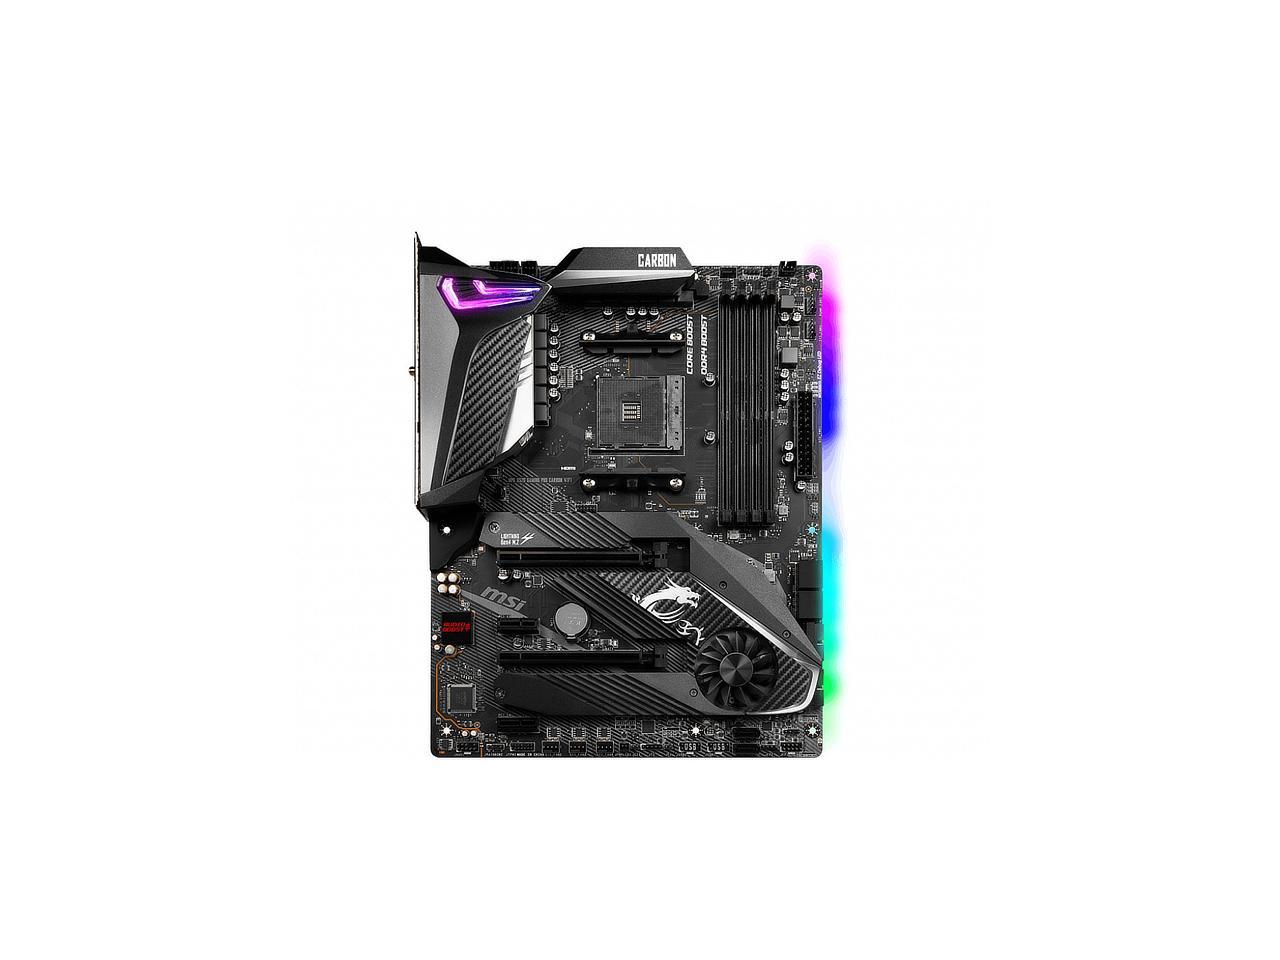 MSI MPG X570 GAMING PRO CARBON WIFI Motherboard (AMD AM4, DDR4, PCIe 4.0,  SATA 6Gb/s, M.2, USB 3.2 Gen 2, AX Wi-Fi 6, HDMI, ATX)